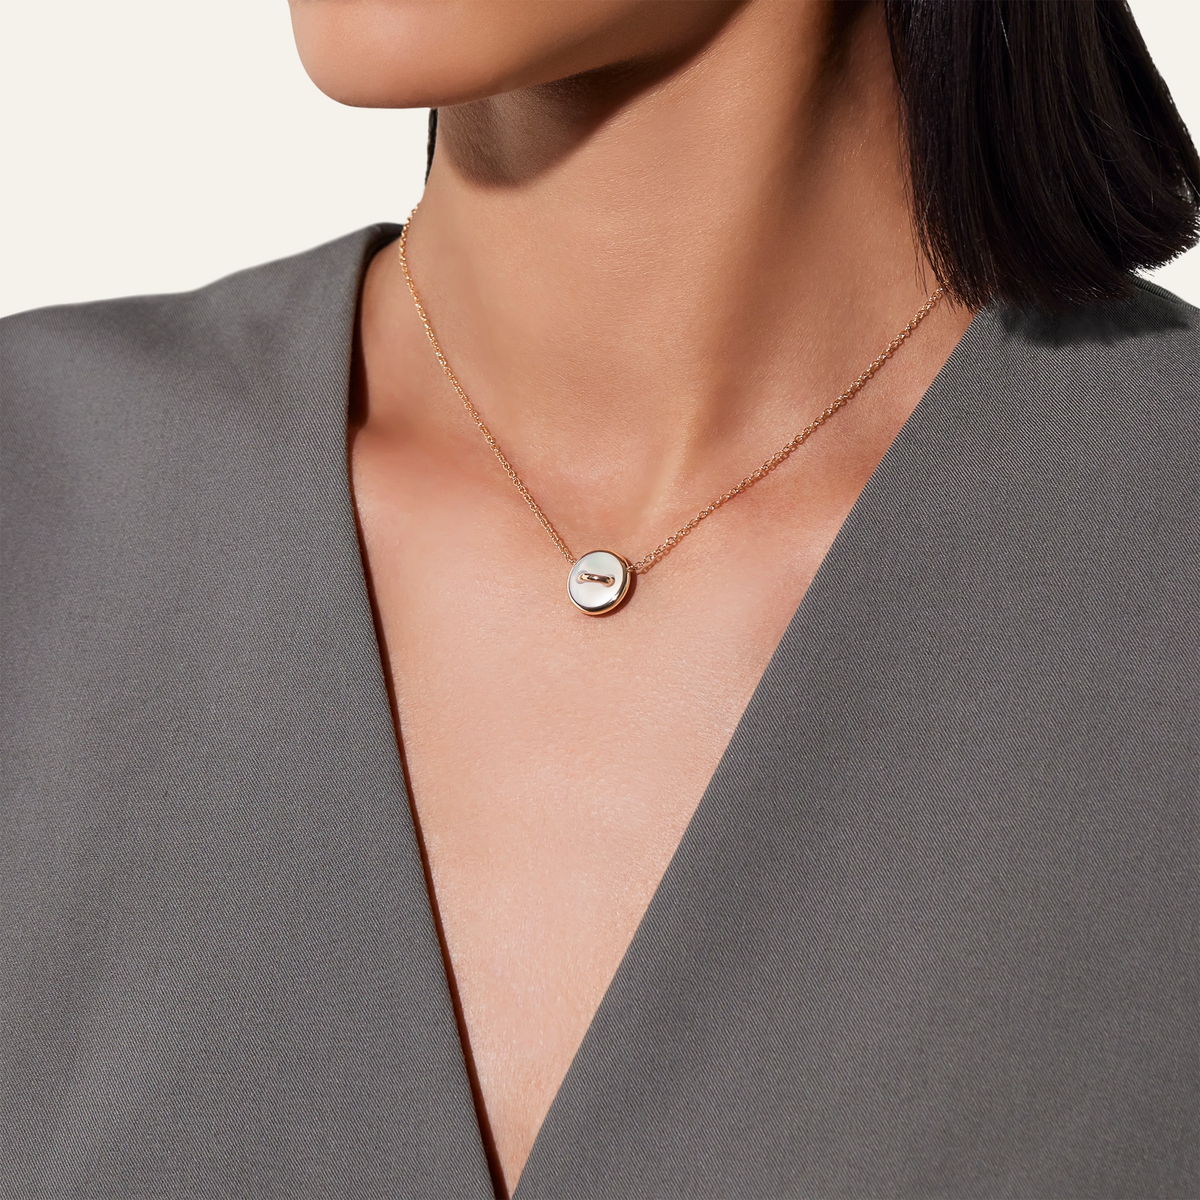 Worn on Model Necklace with Mother of Pearl and White Diamonds